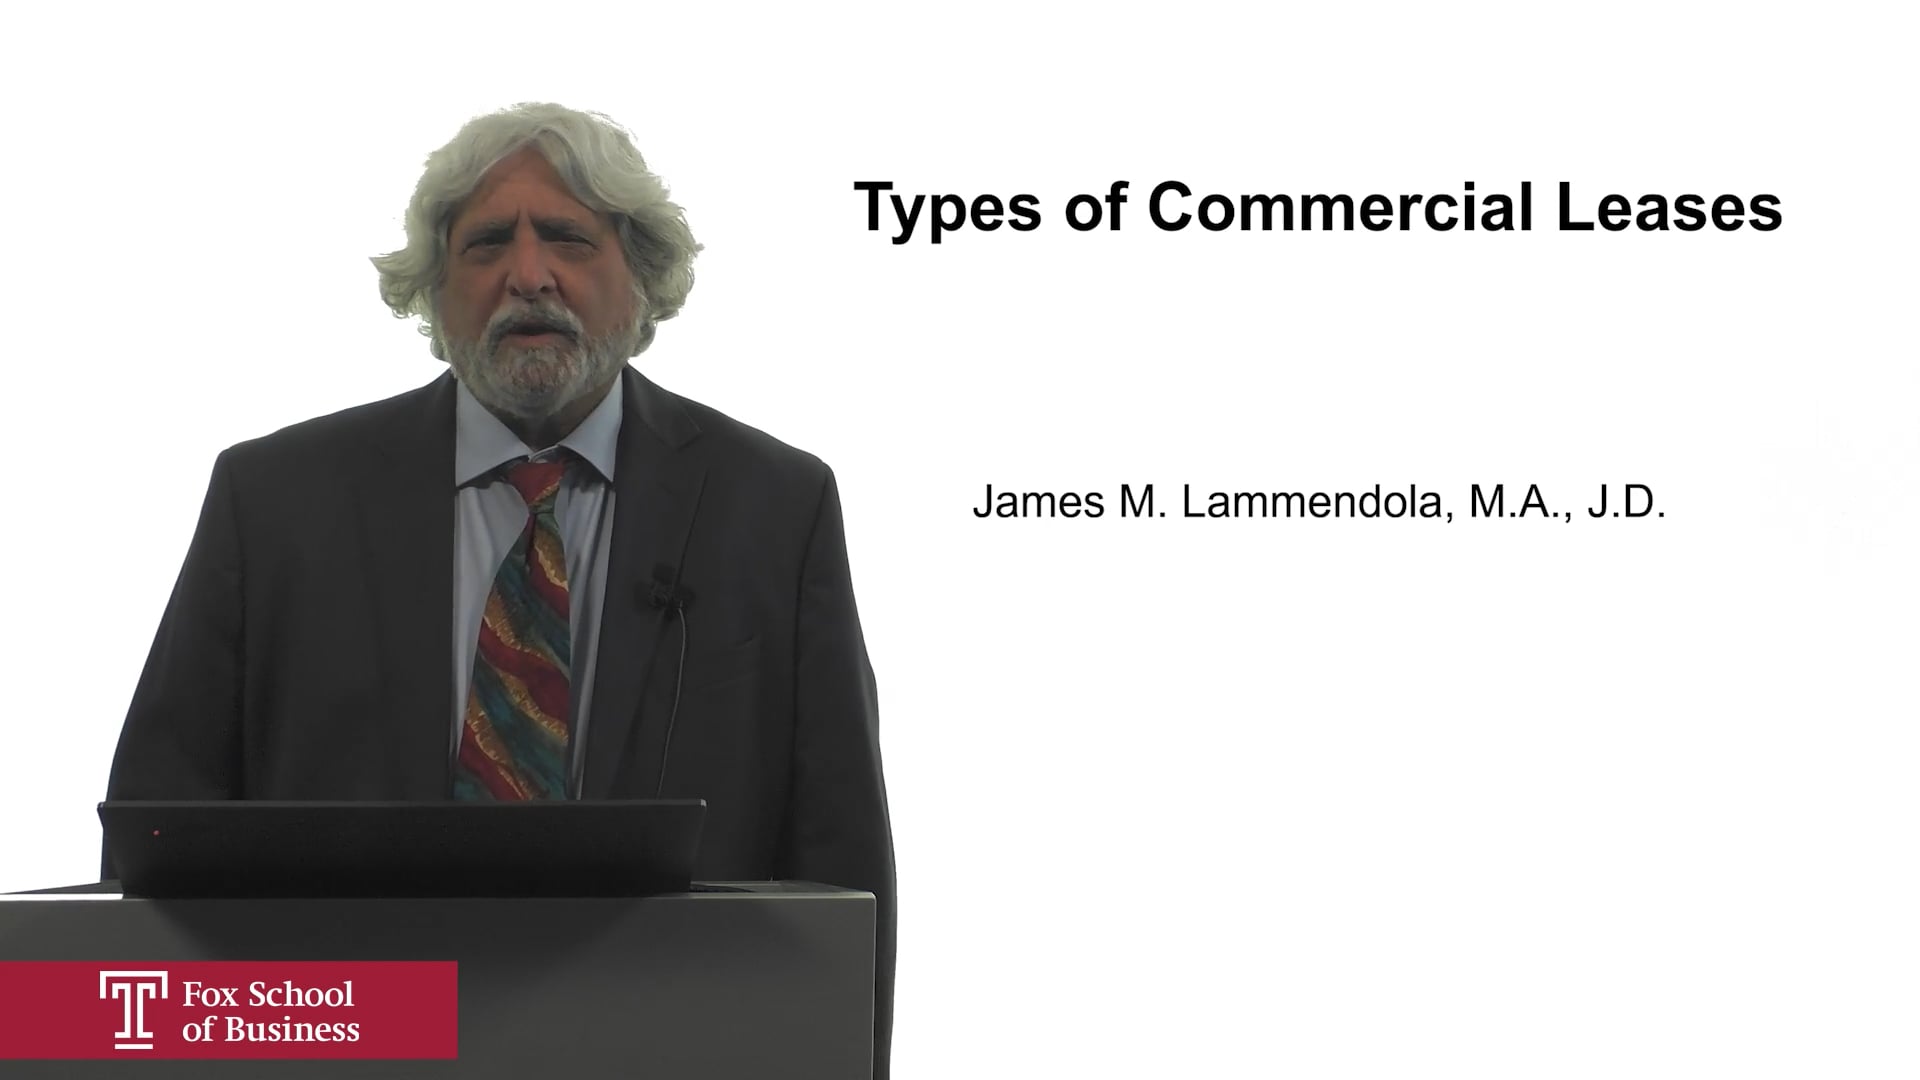 Types of Commercial Leases